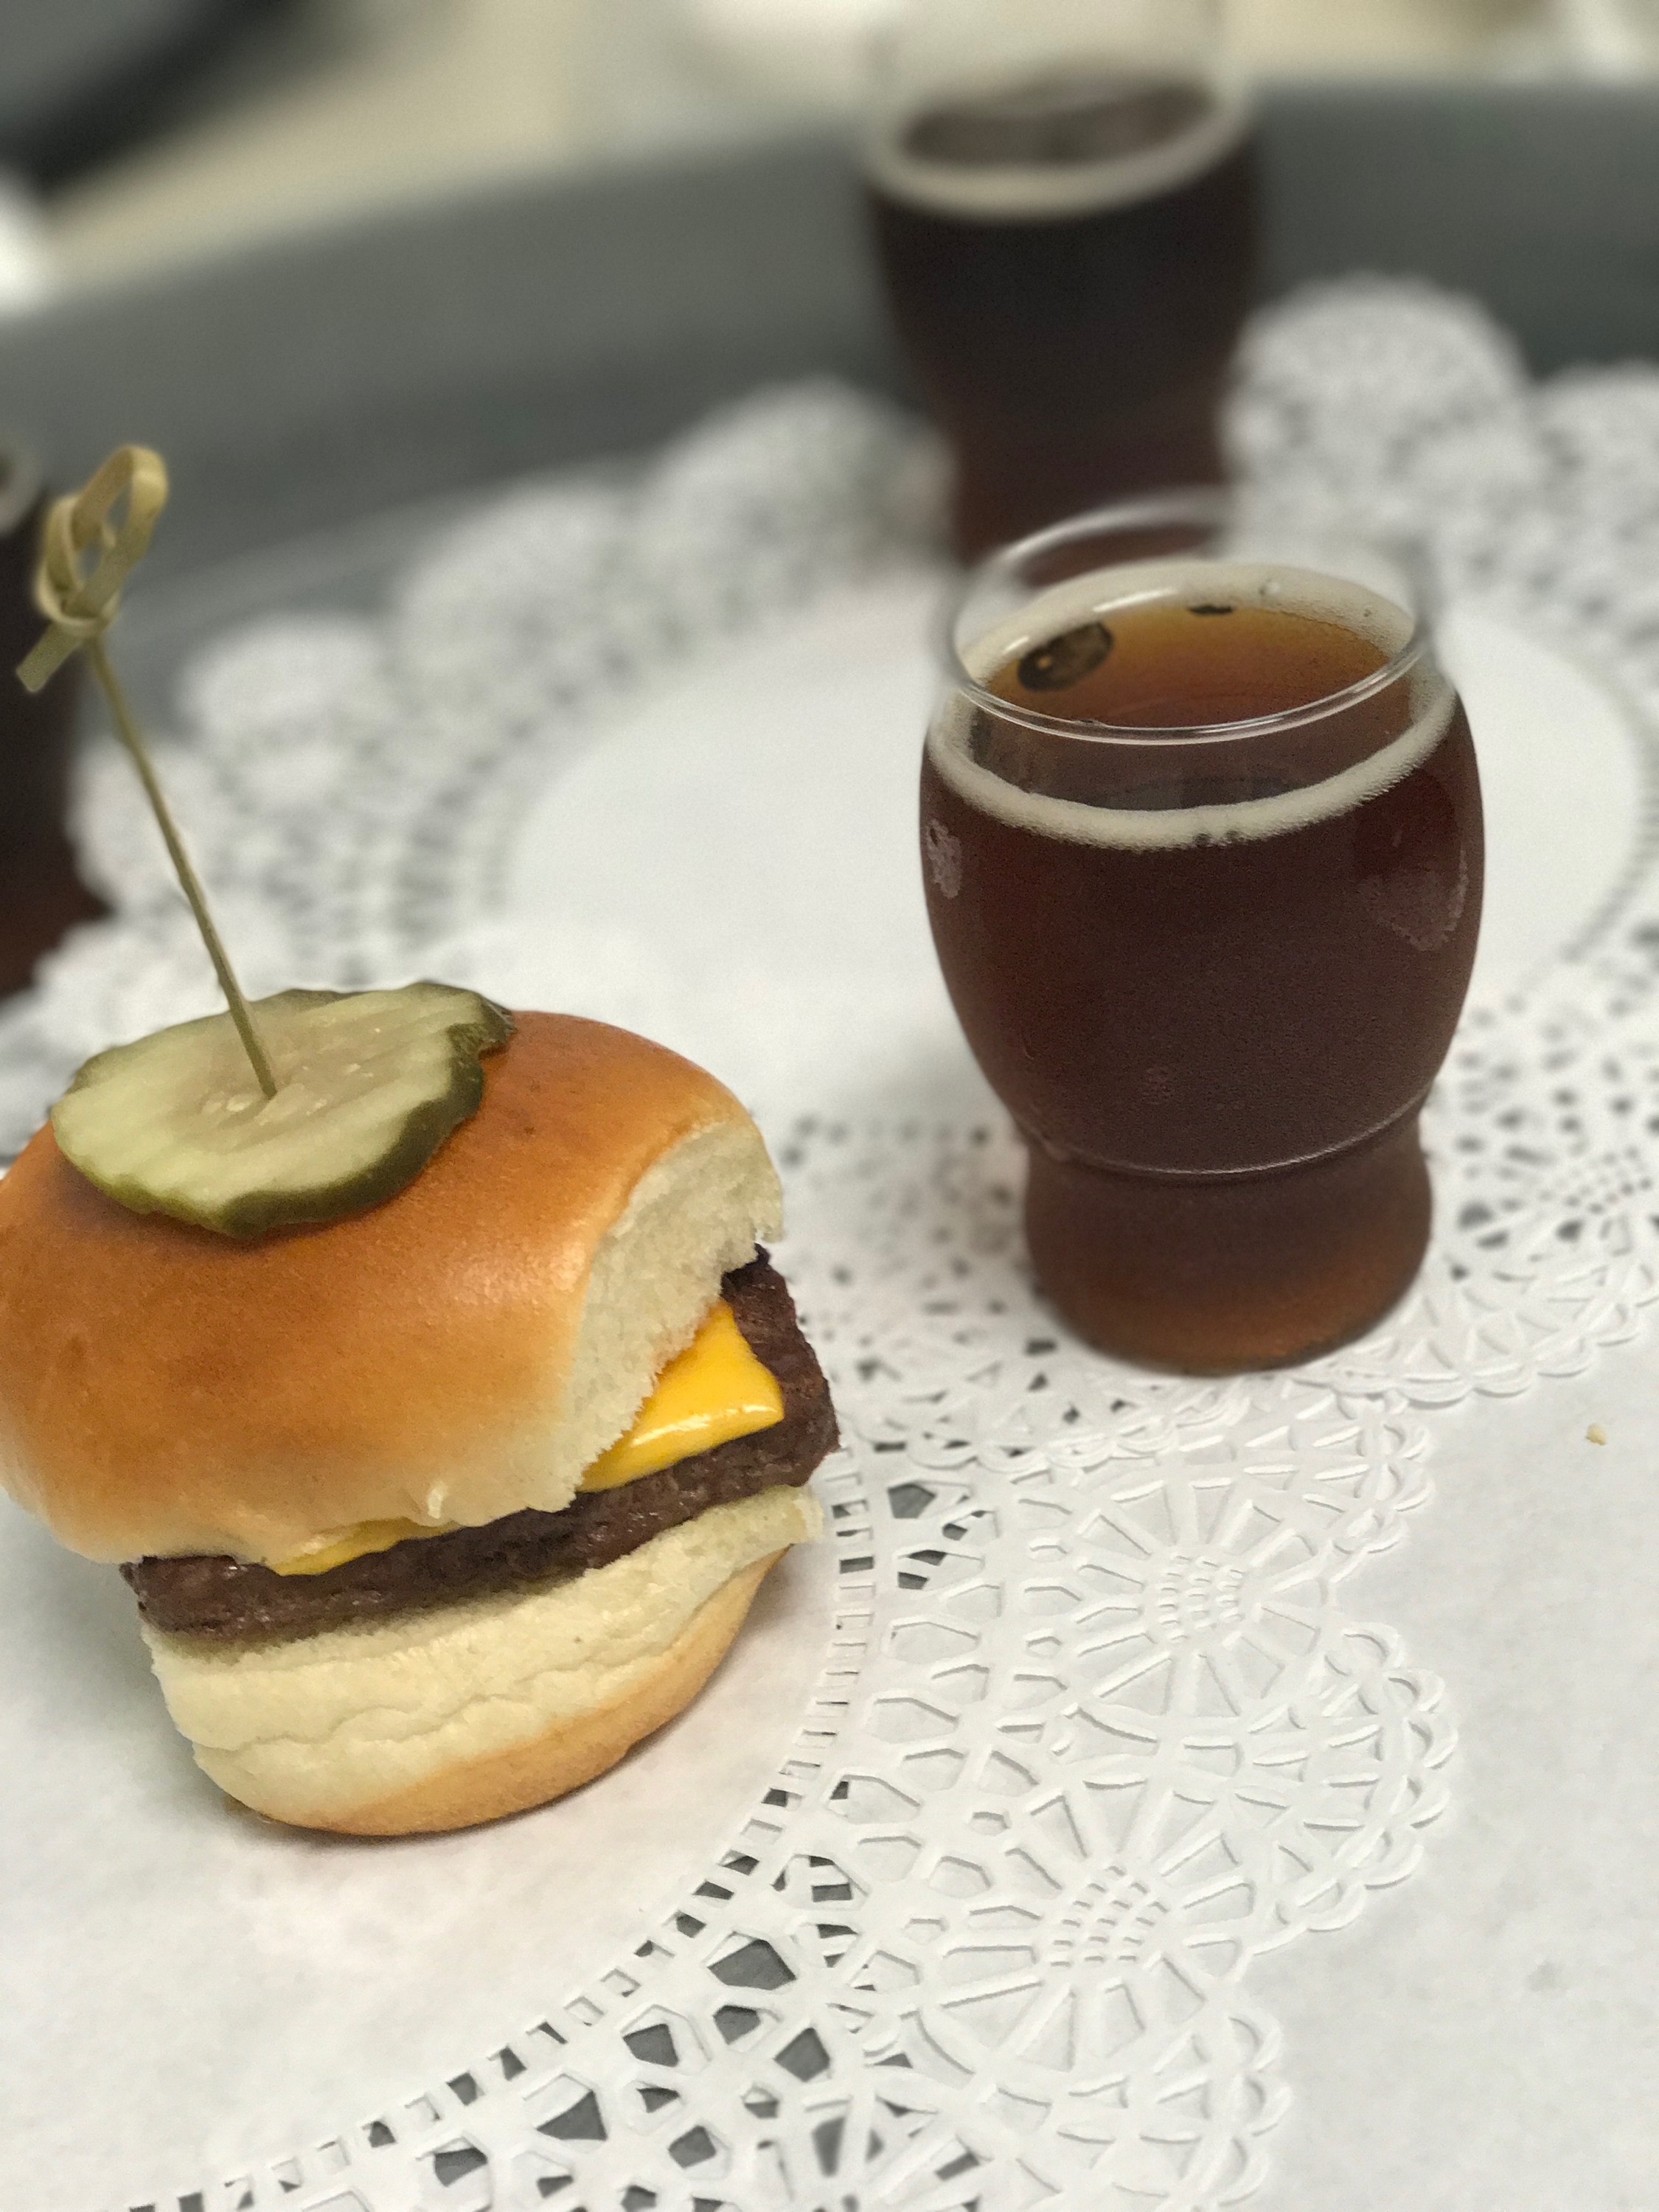 cheeseburger slider with a brown ale sipper